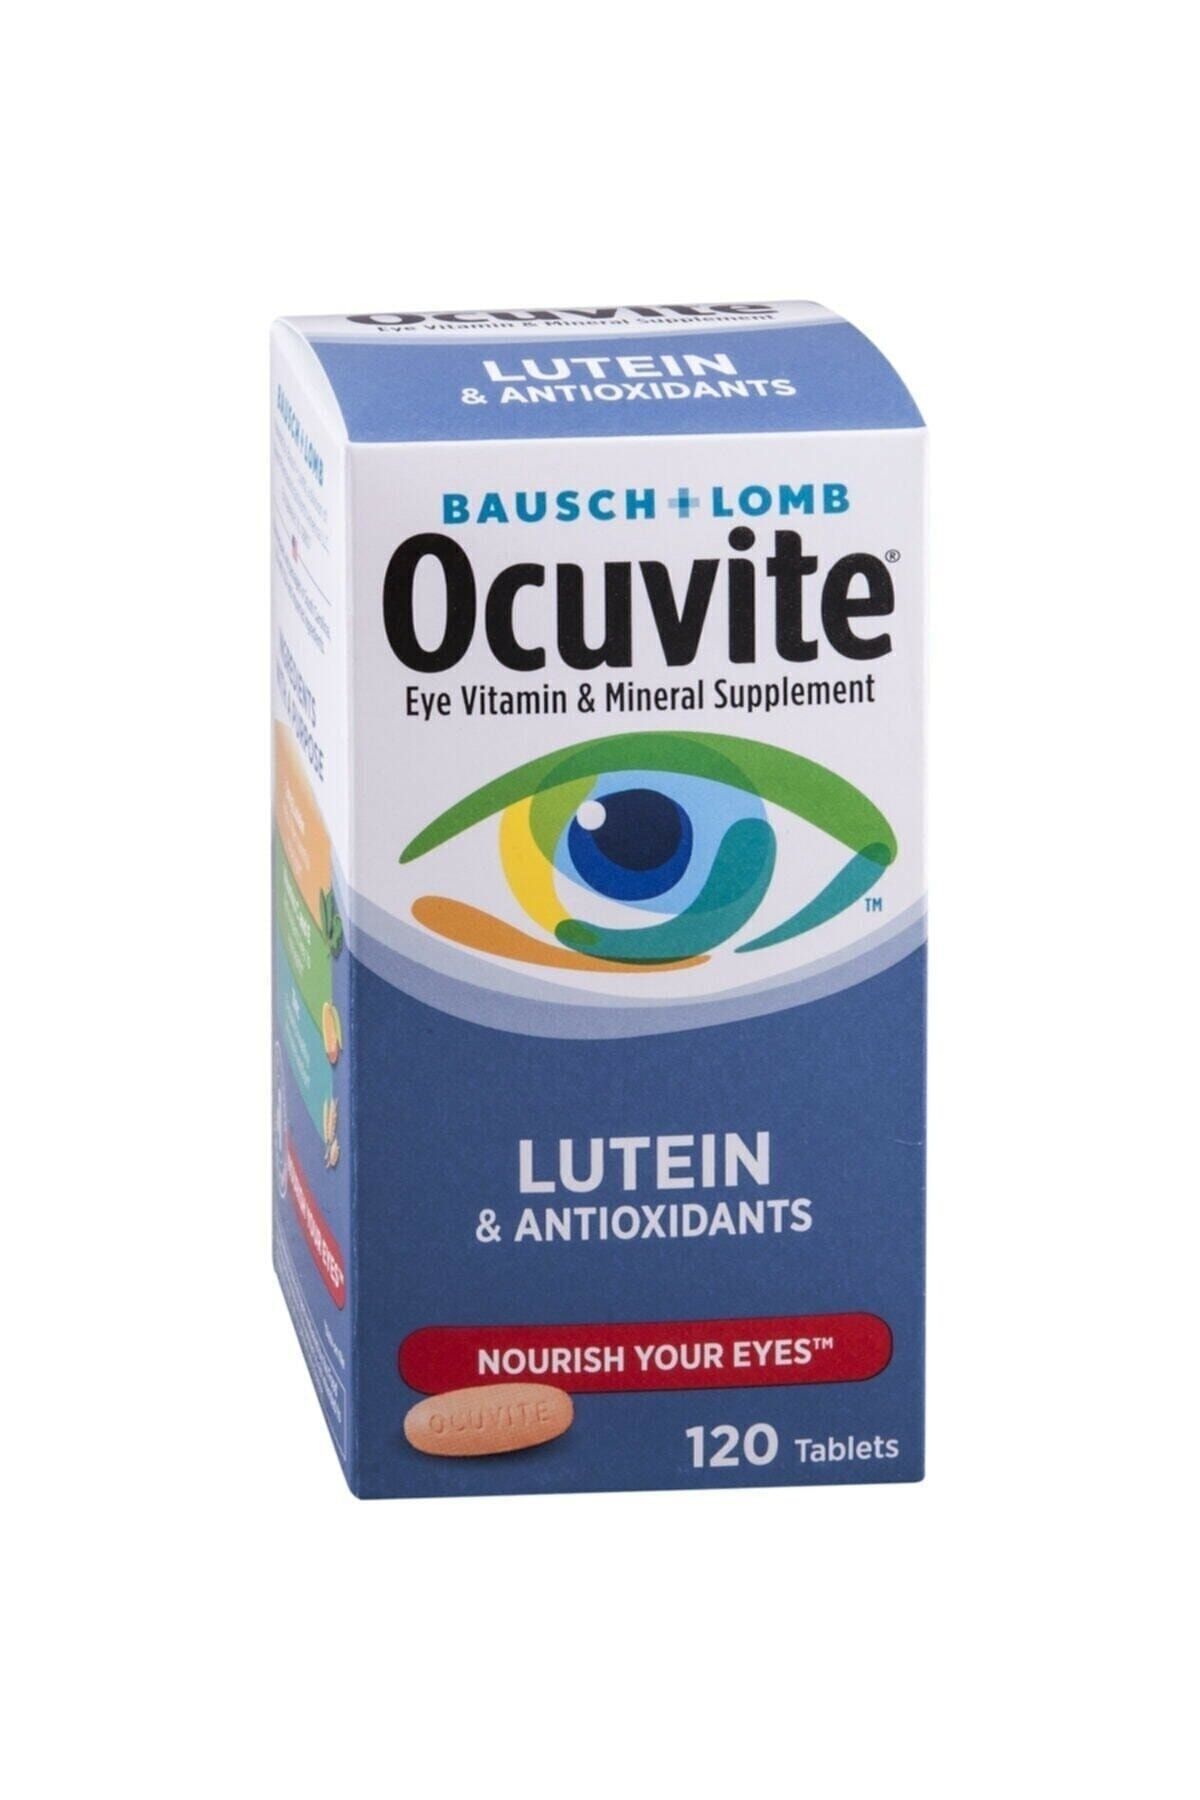 Ocuvite Bausch + Lomb Vitamin & Mineral Supplement Tablets With Lutein, 120 Count Bottle